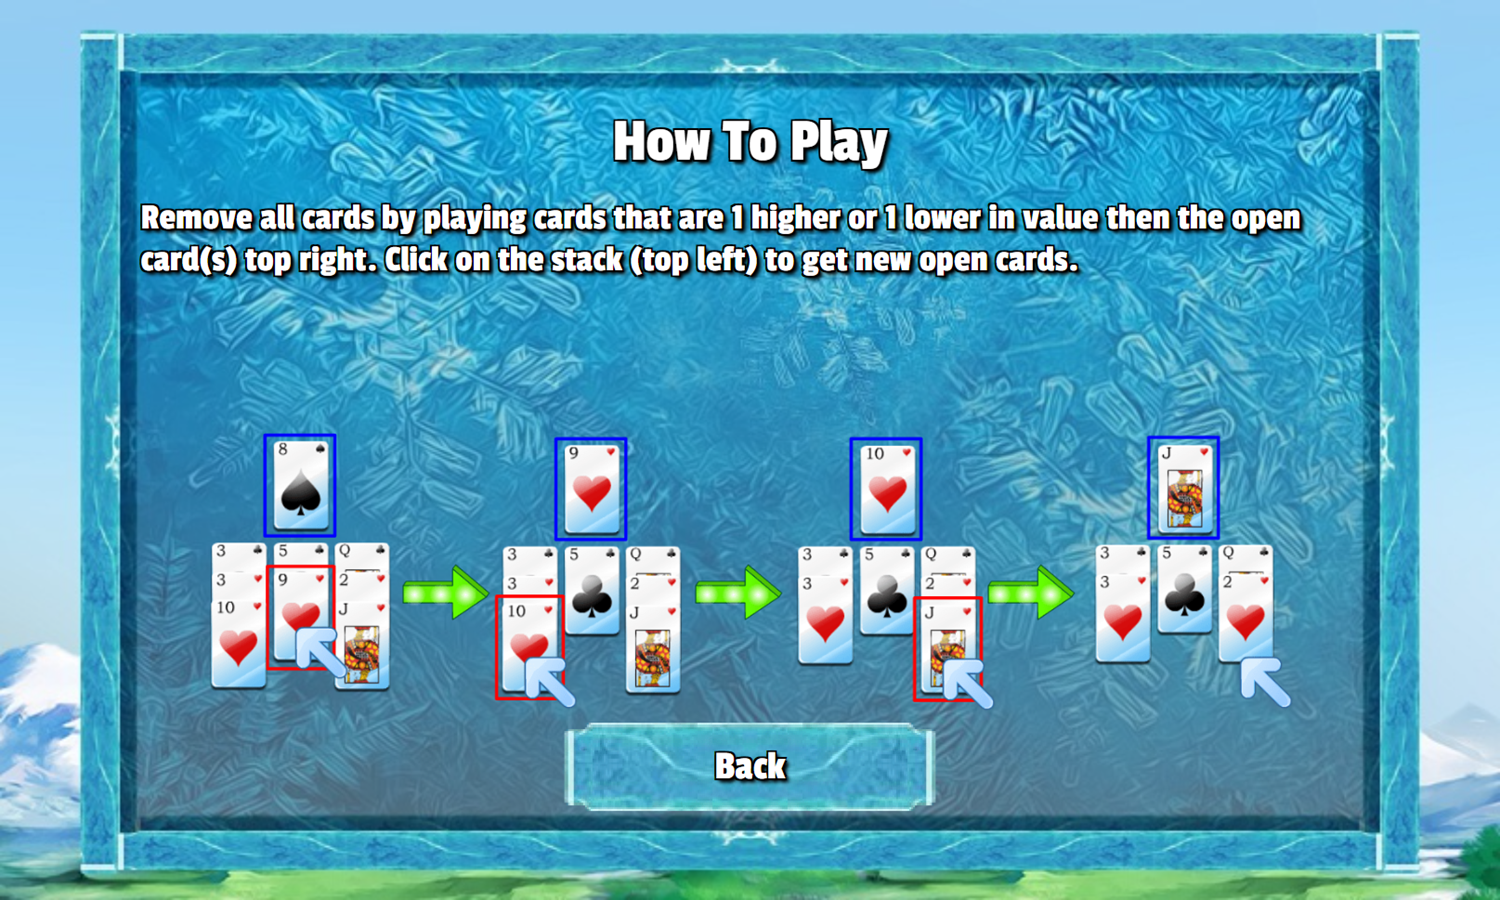 Snowy Peaks Solitaire Game How To Play Screenshot.